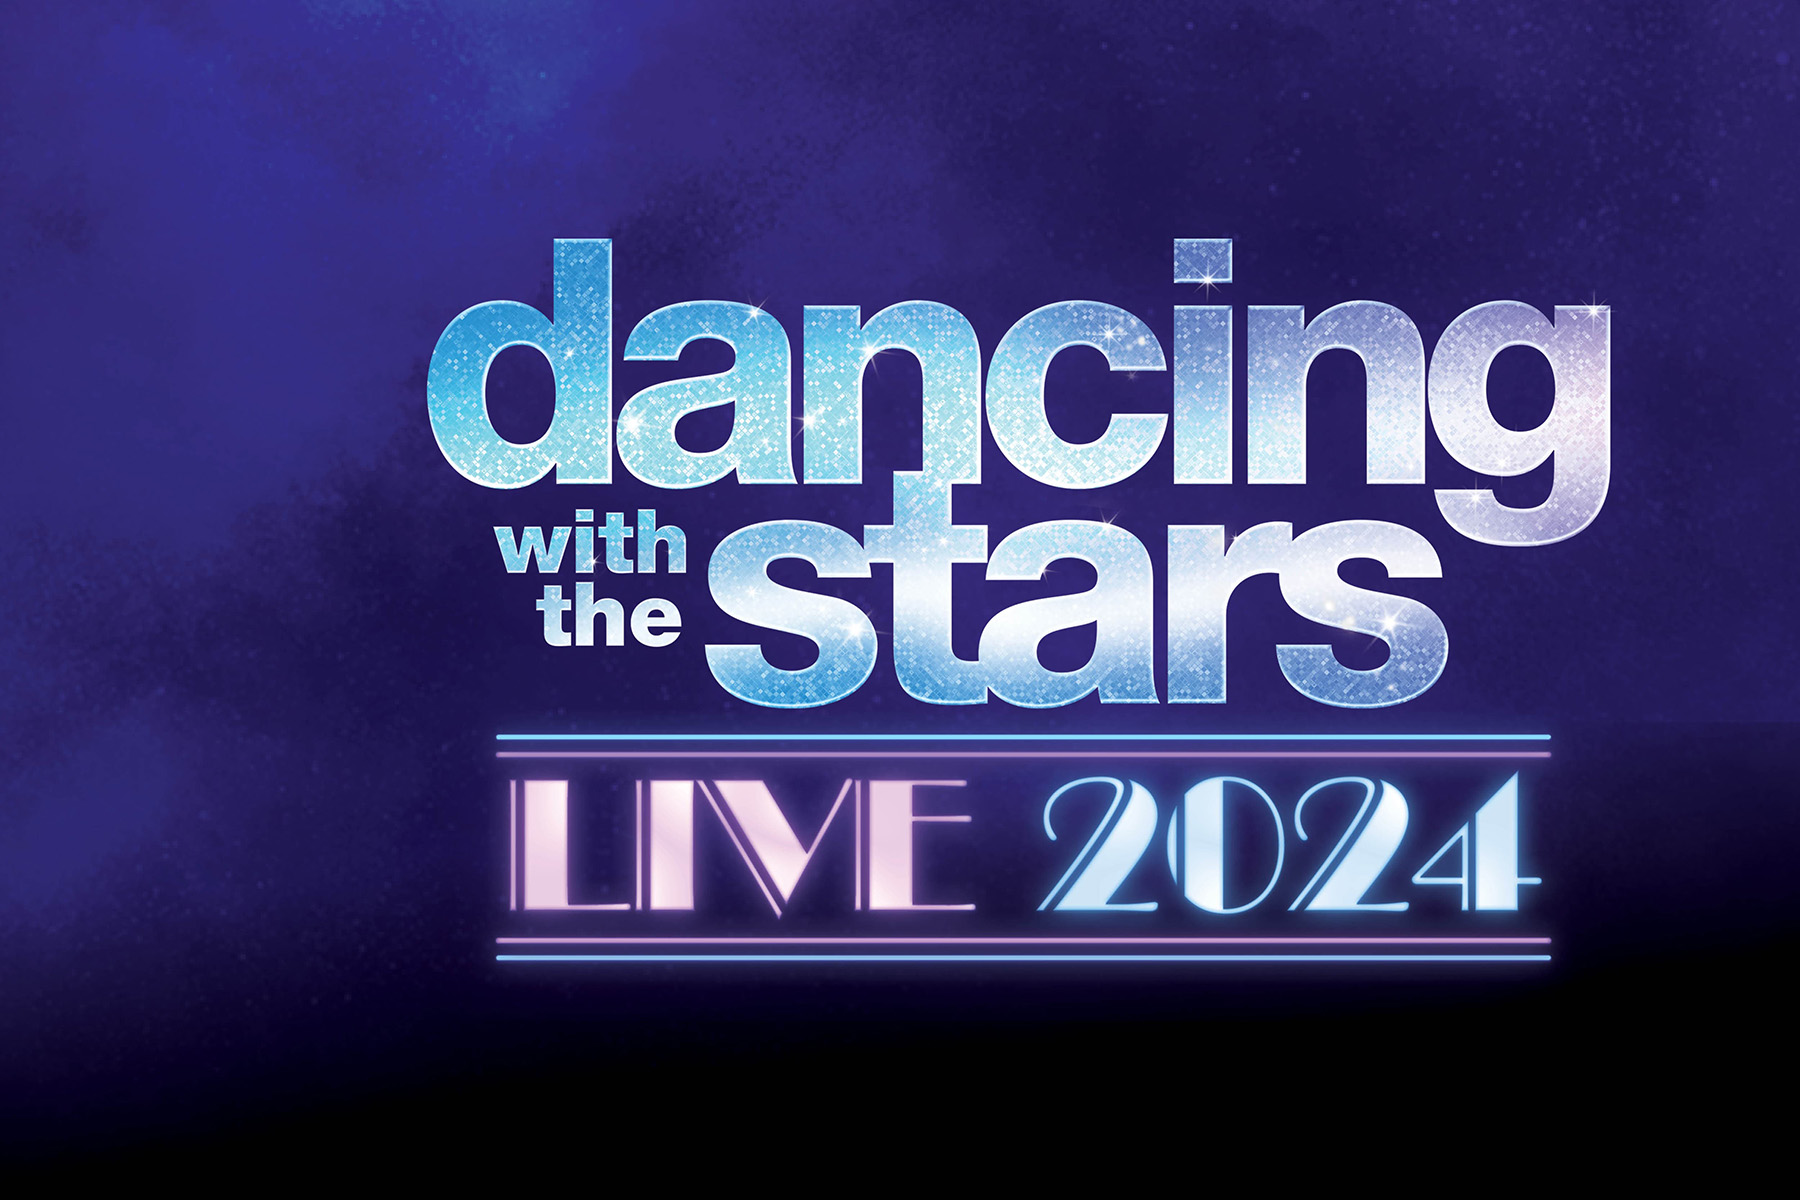 Dwts 2024 Tour: Get Tickets Now and Experience Dazzling Routines!